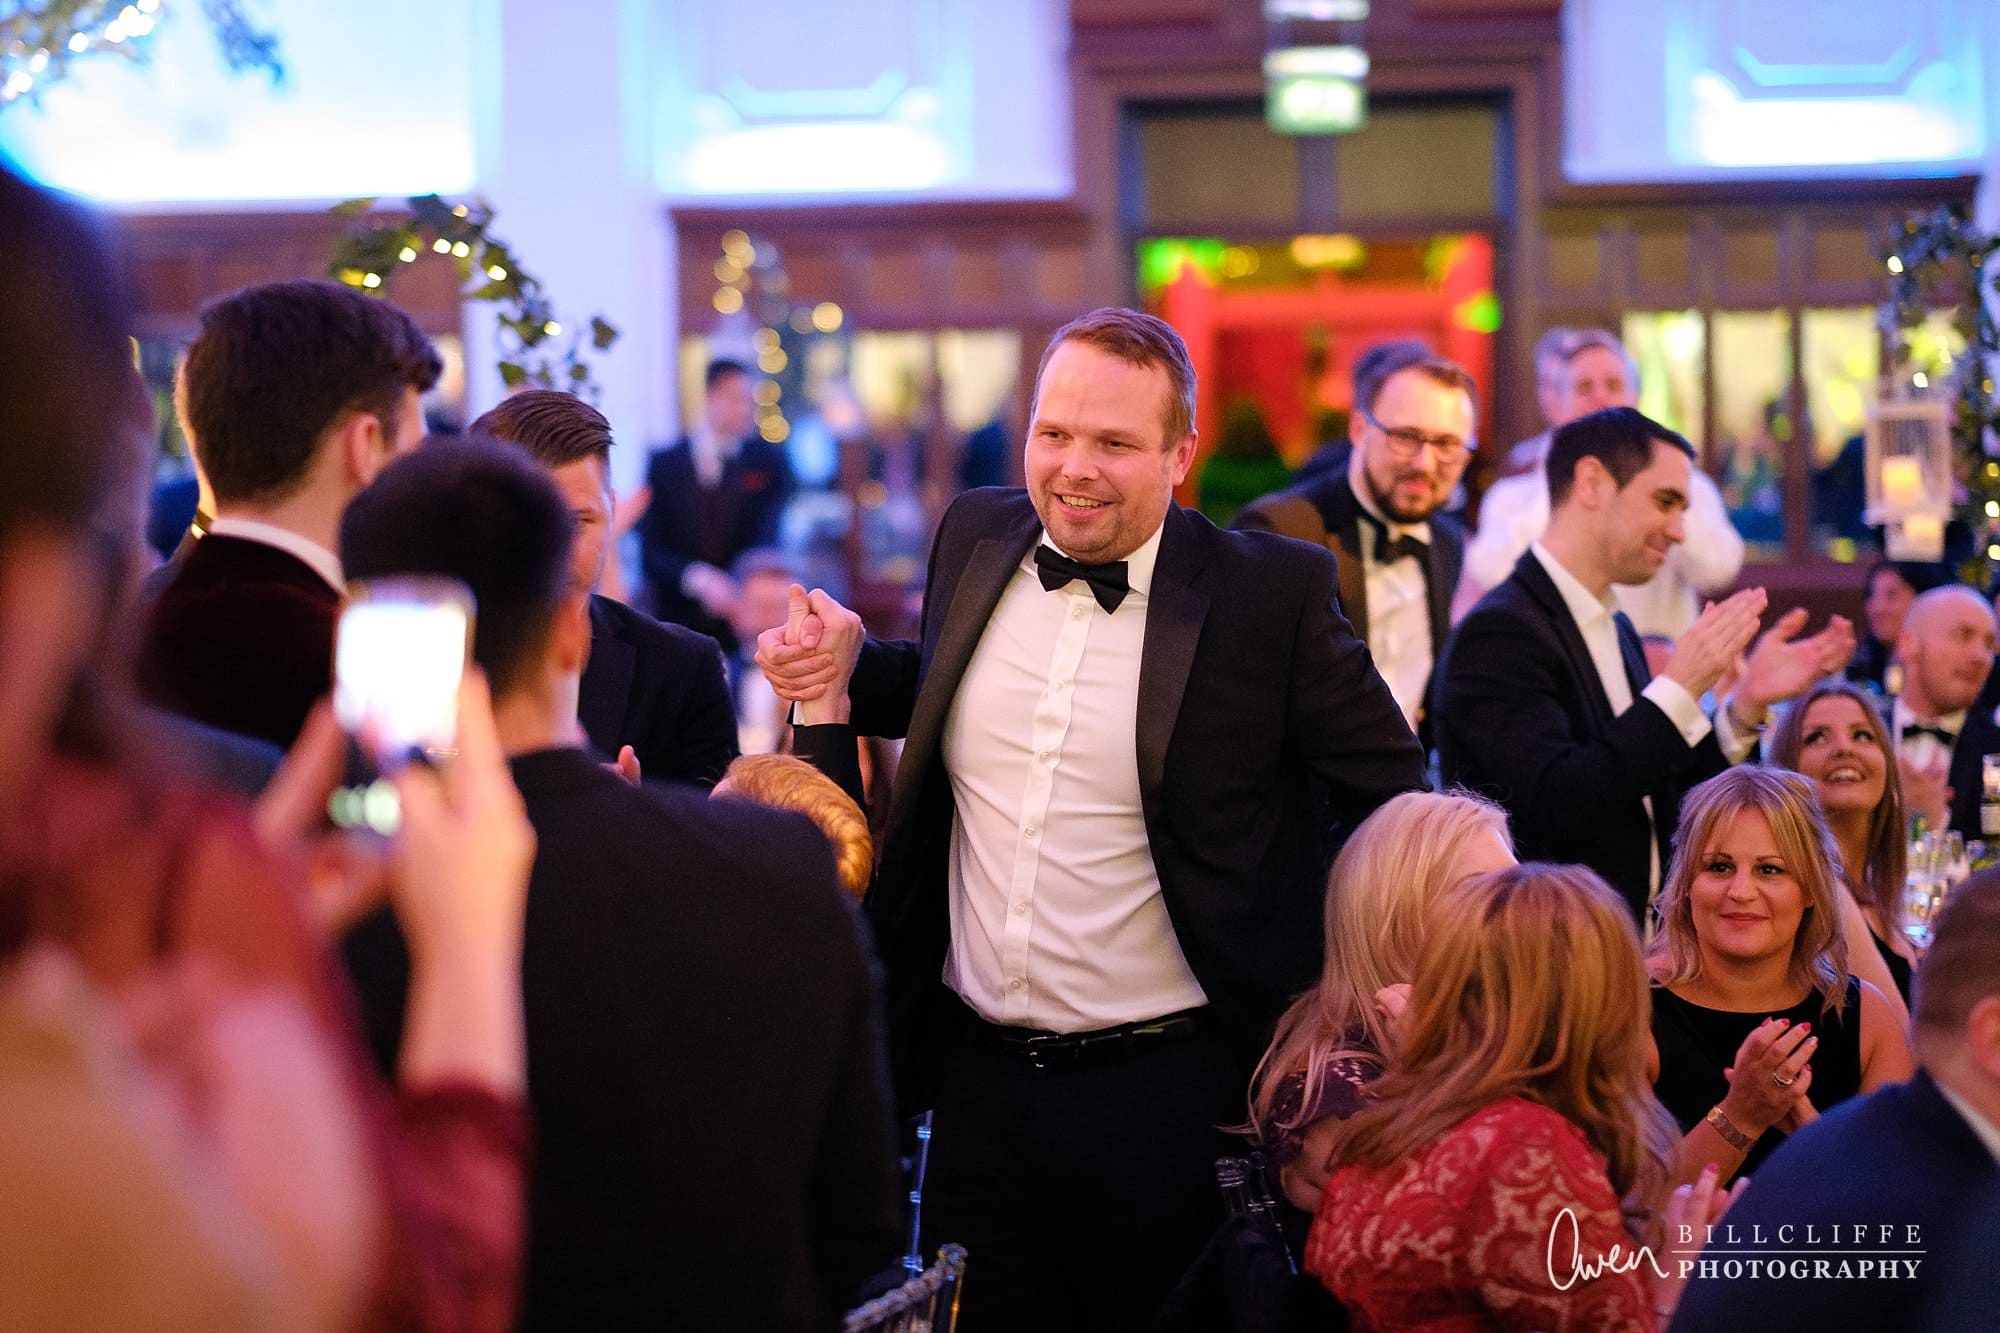 london event photographer 8 northumberland avenue mh 013 - A Christmas Party at 8 Northumberland